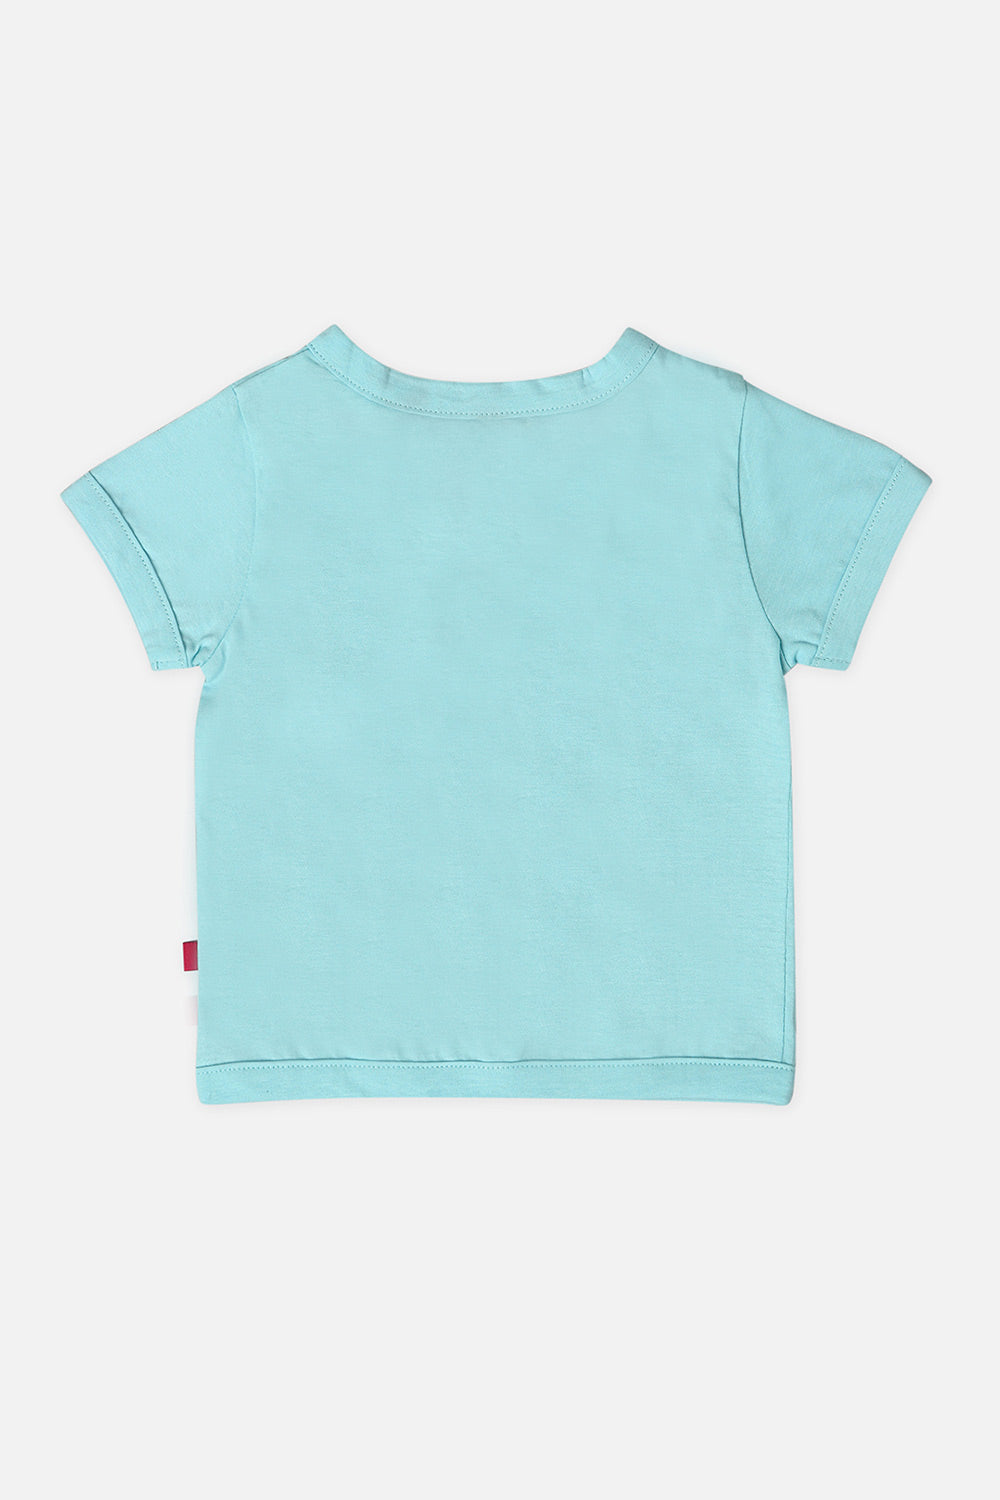 Oh Baby T Shirts Front Open Light Blue-Ts12